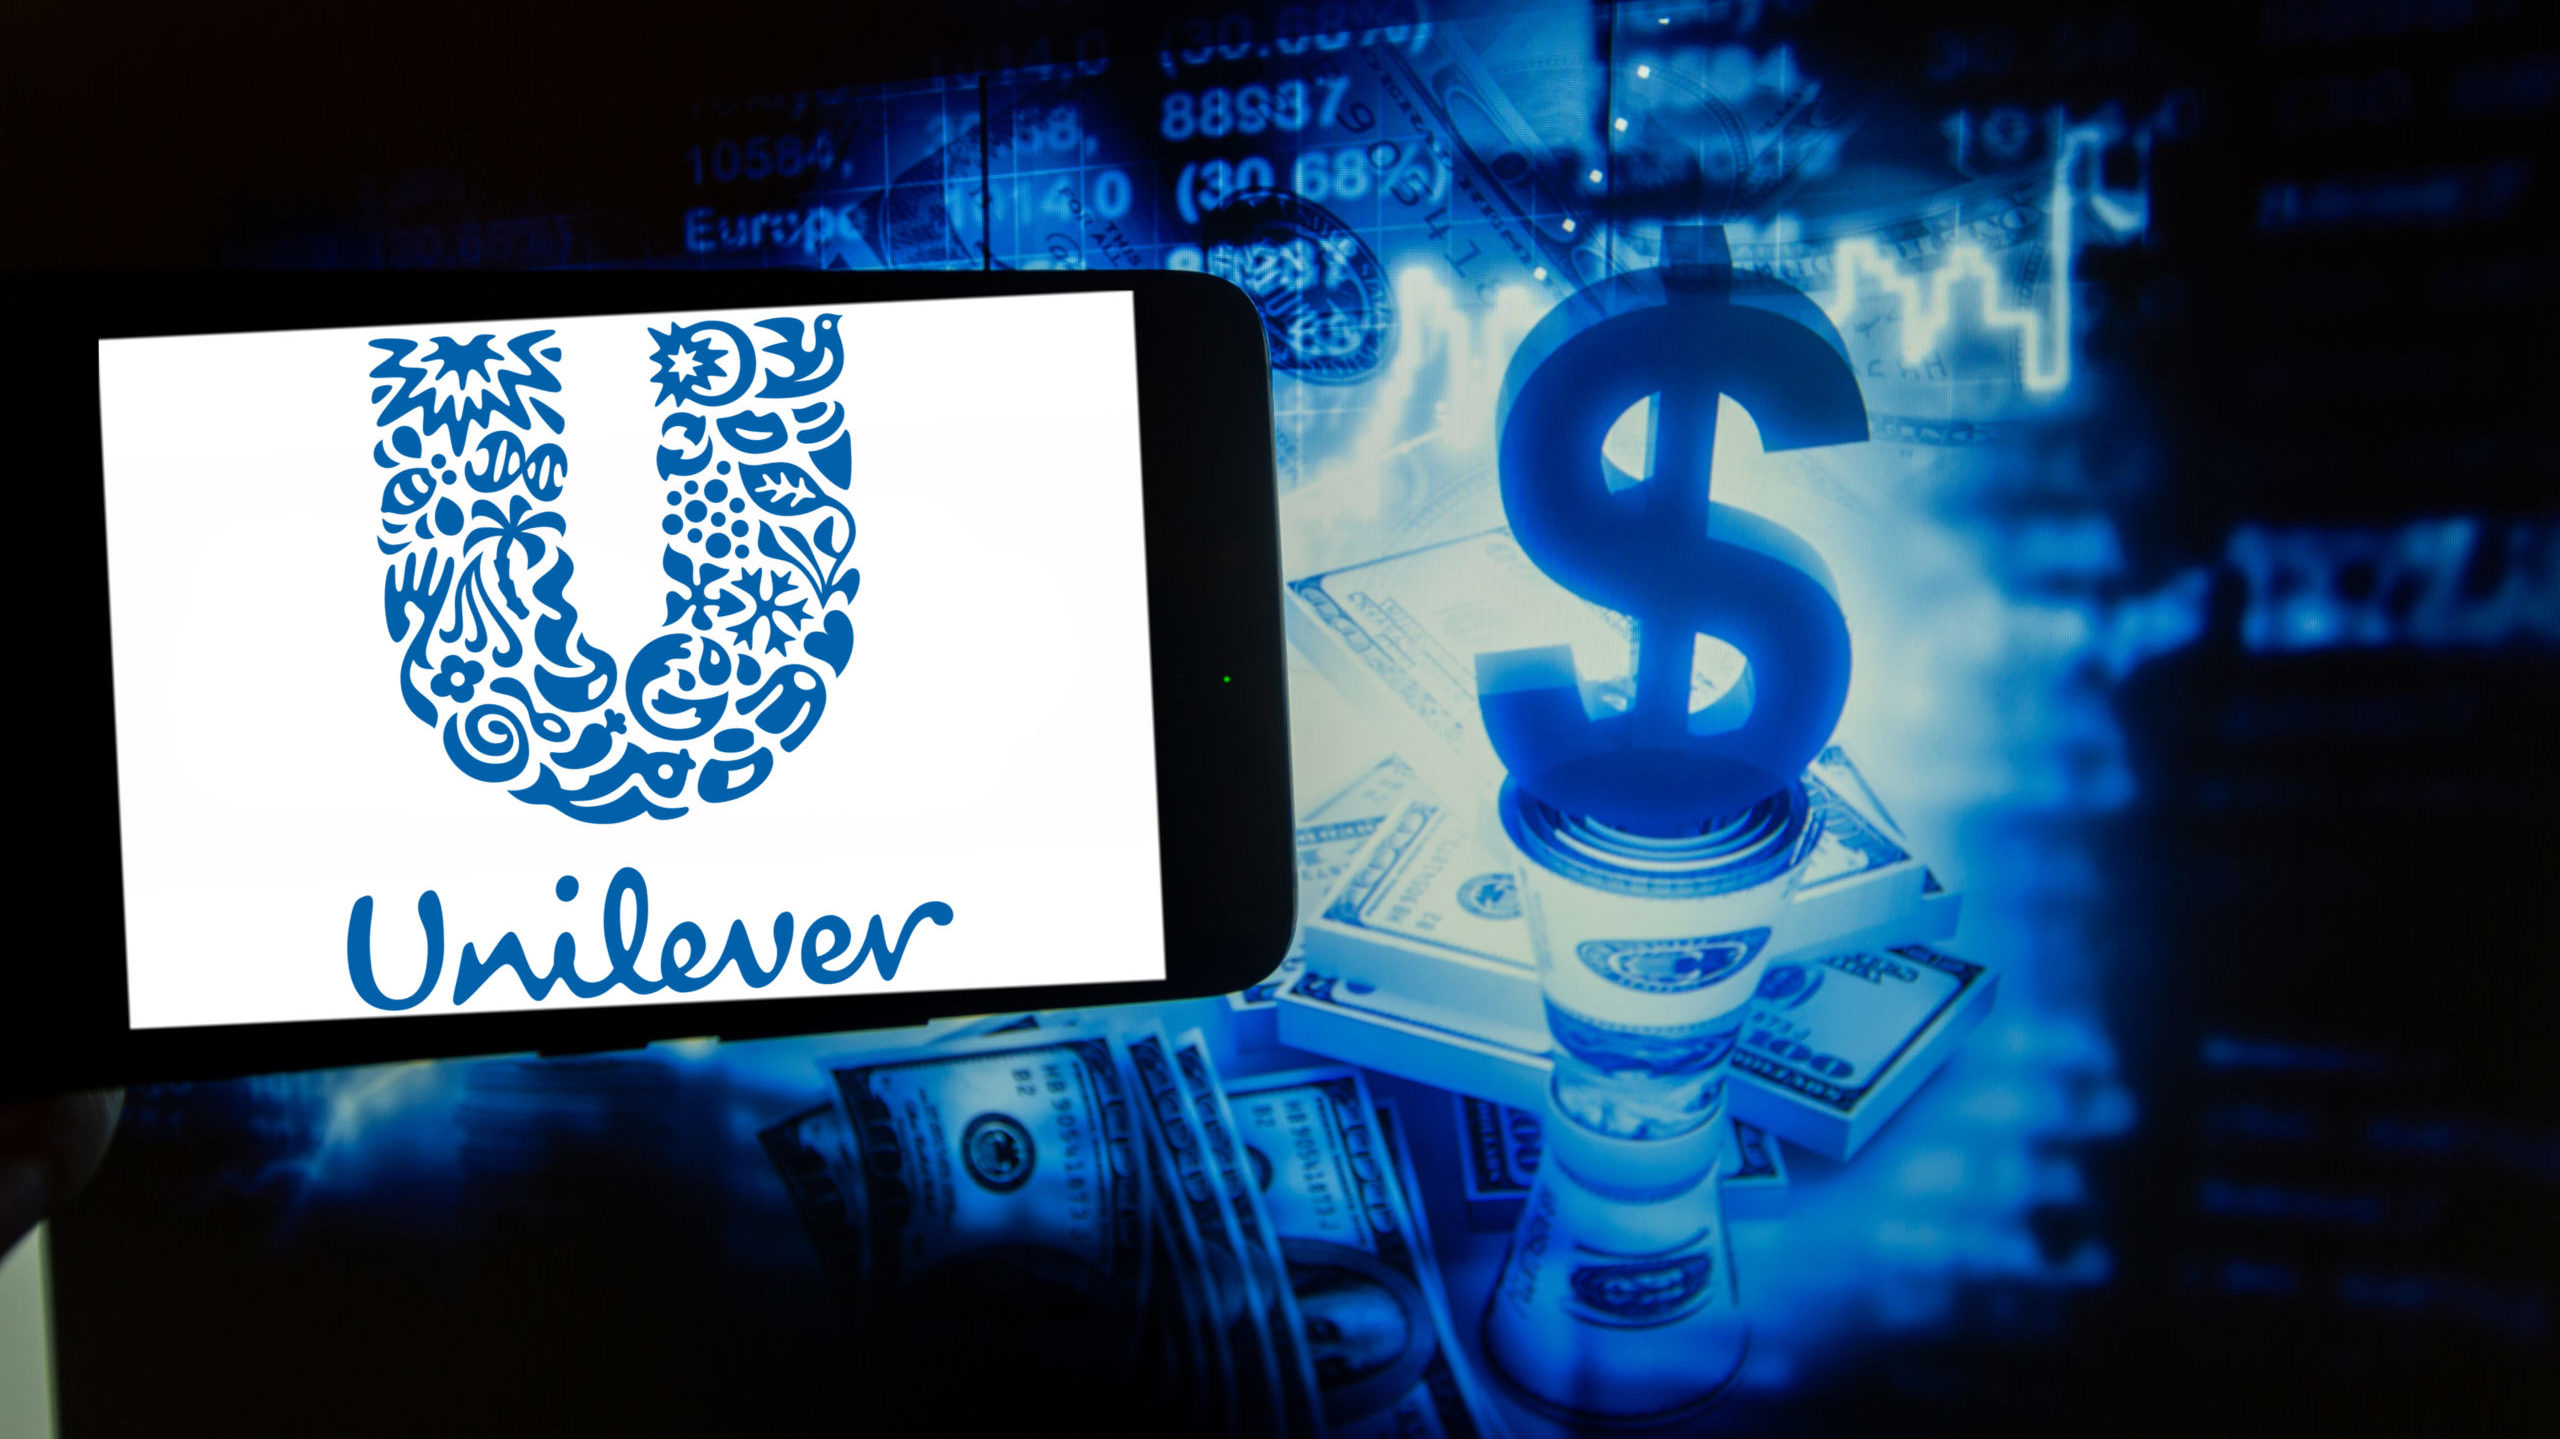 NY State Comptroller: Divestment From Unilever an Economic, Not Political, Matter